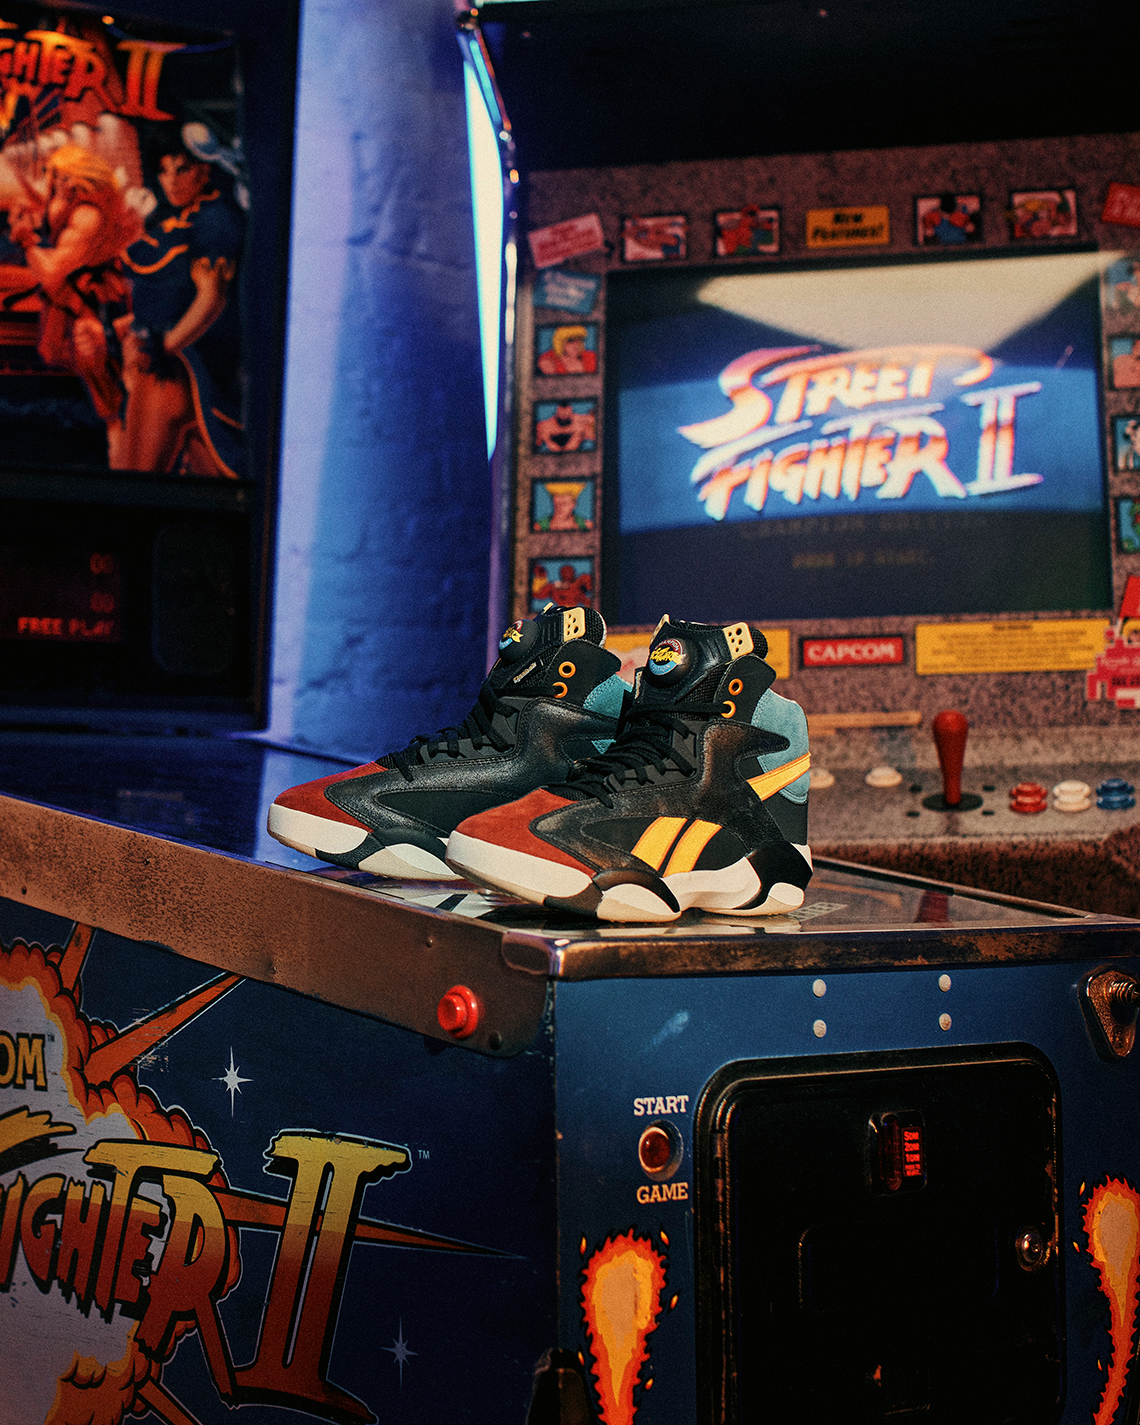 Street Fighter Ii Reebok Is Bringing Back NBA Icon Allen Iversons Answer Basketball Shoe From 1997 1